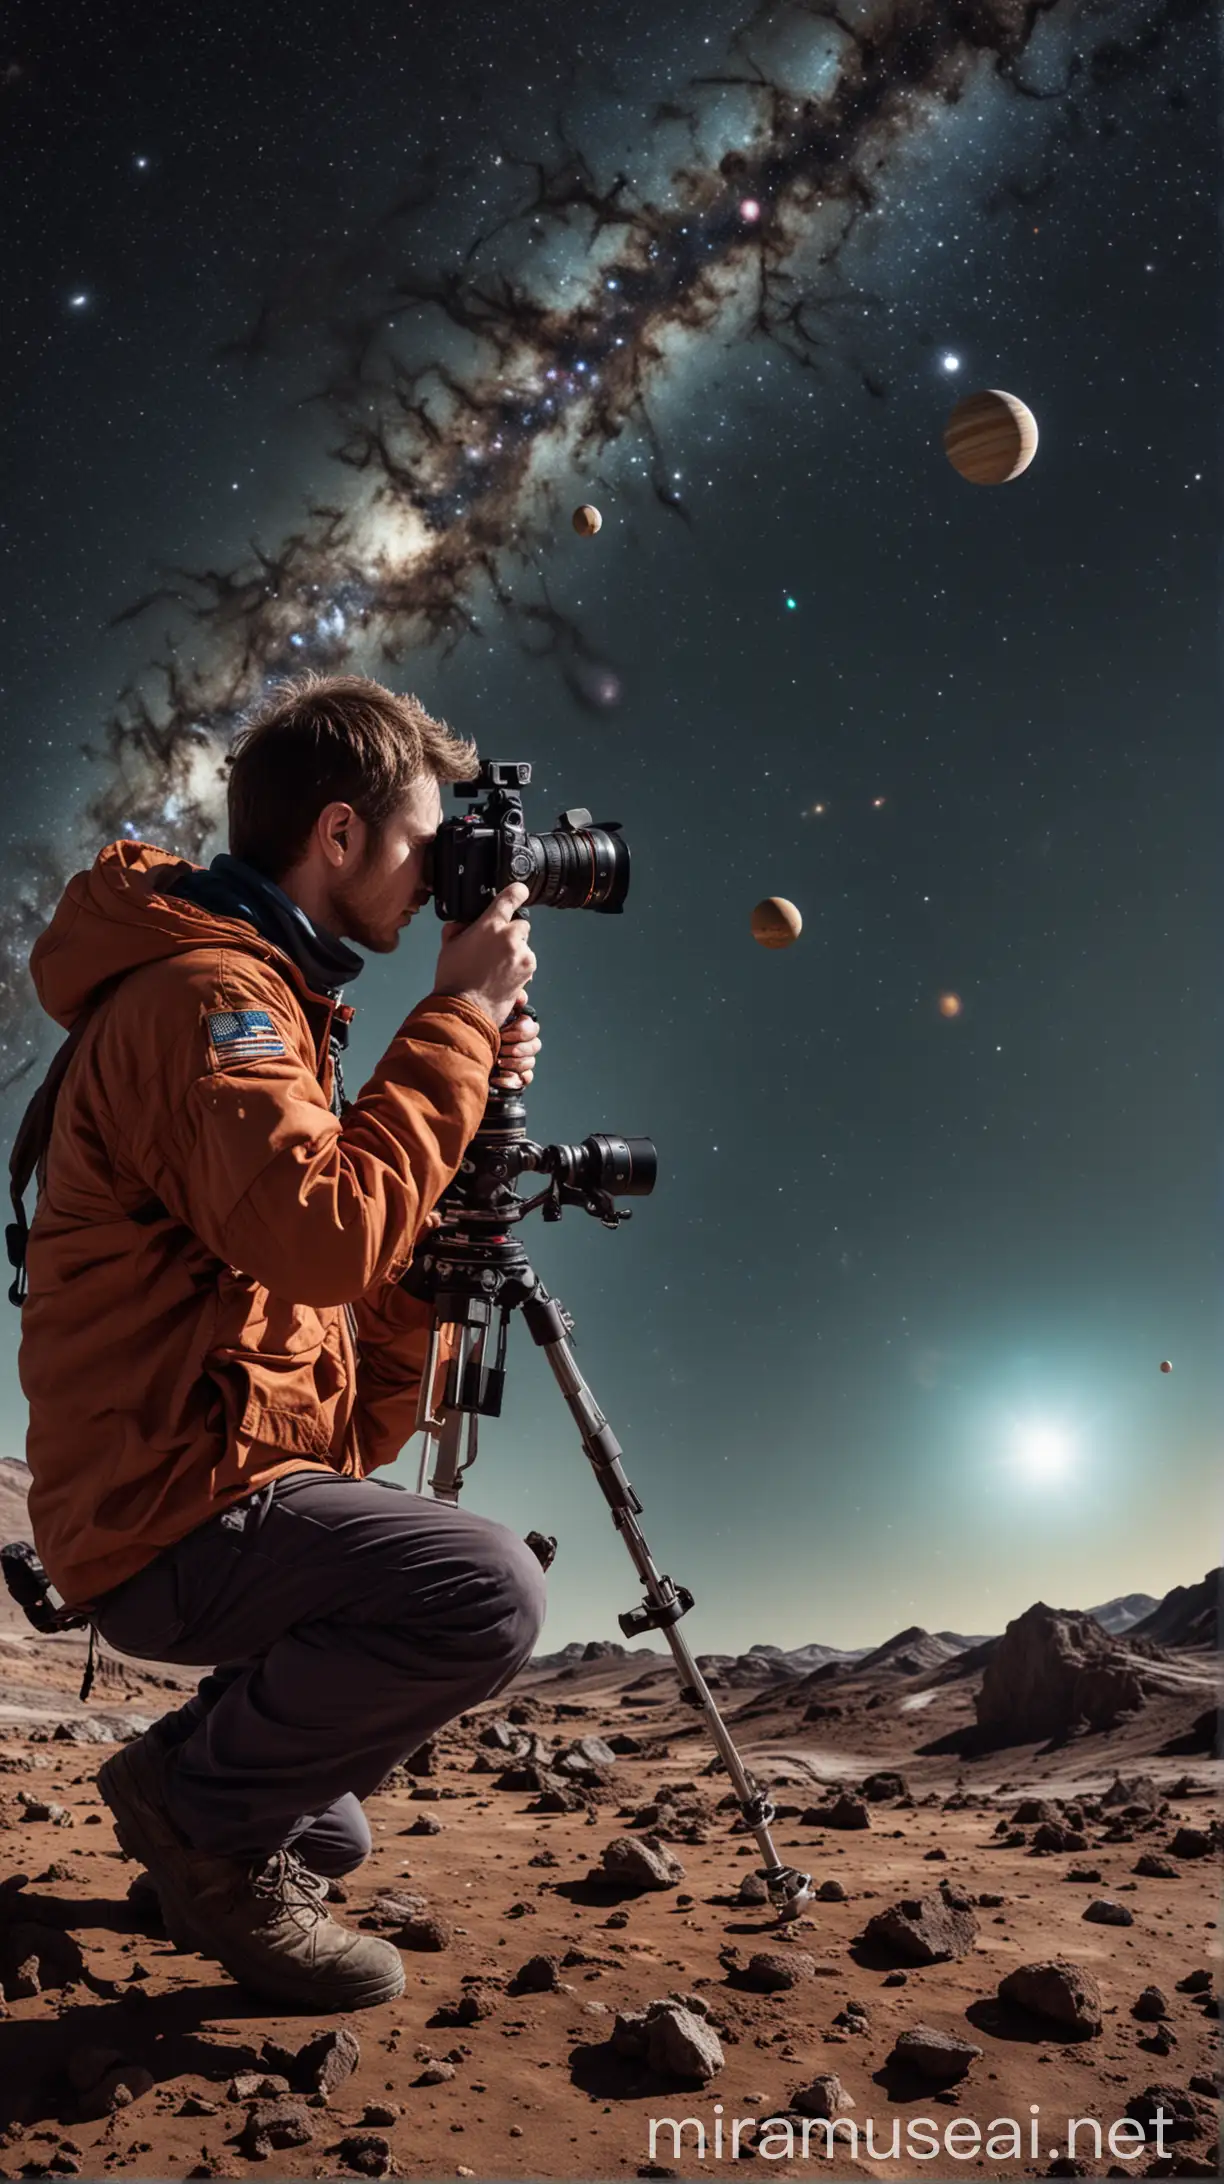 An image of a photographer photographing planets with a space camera